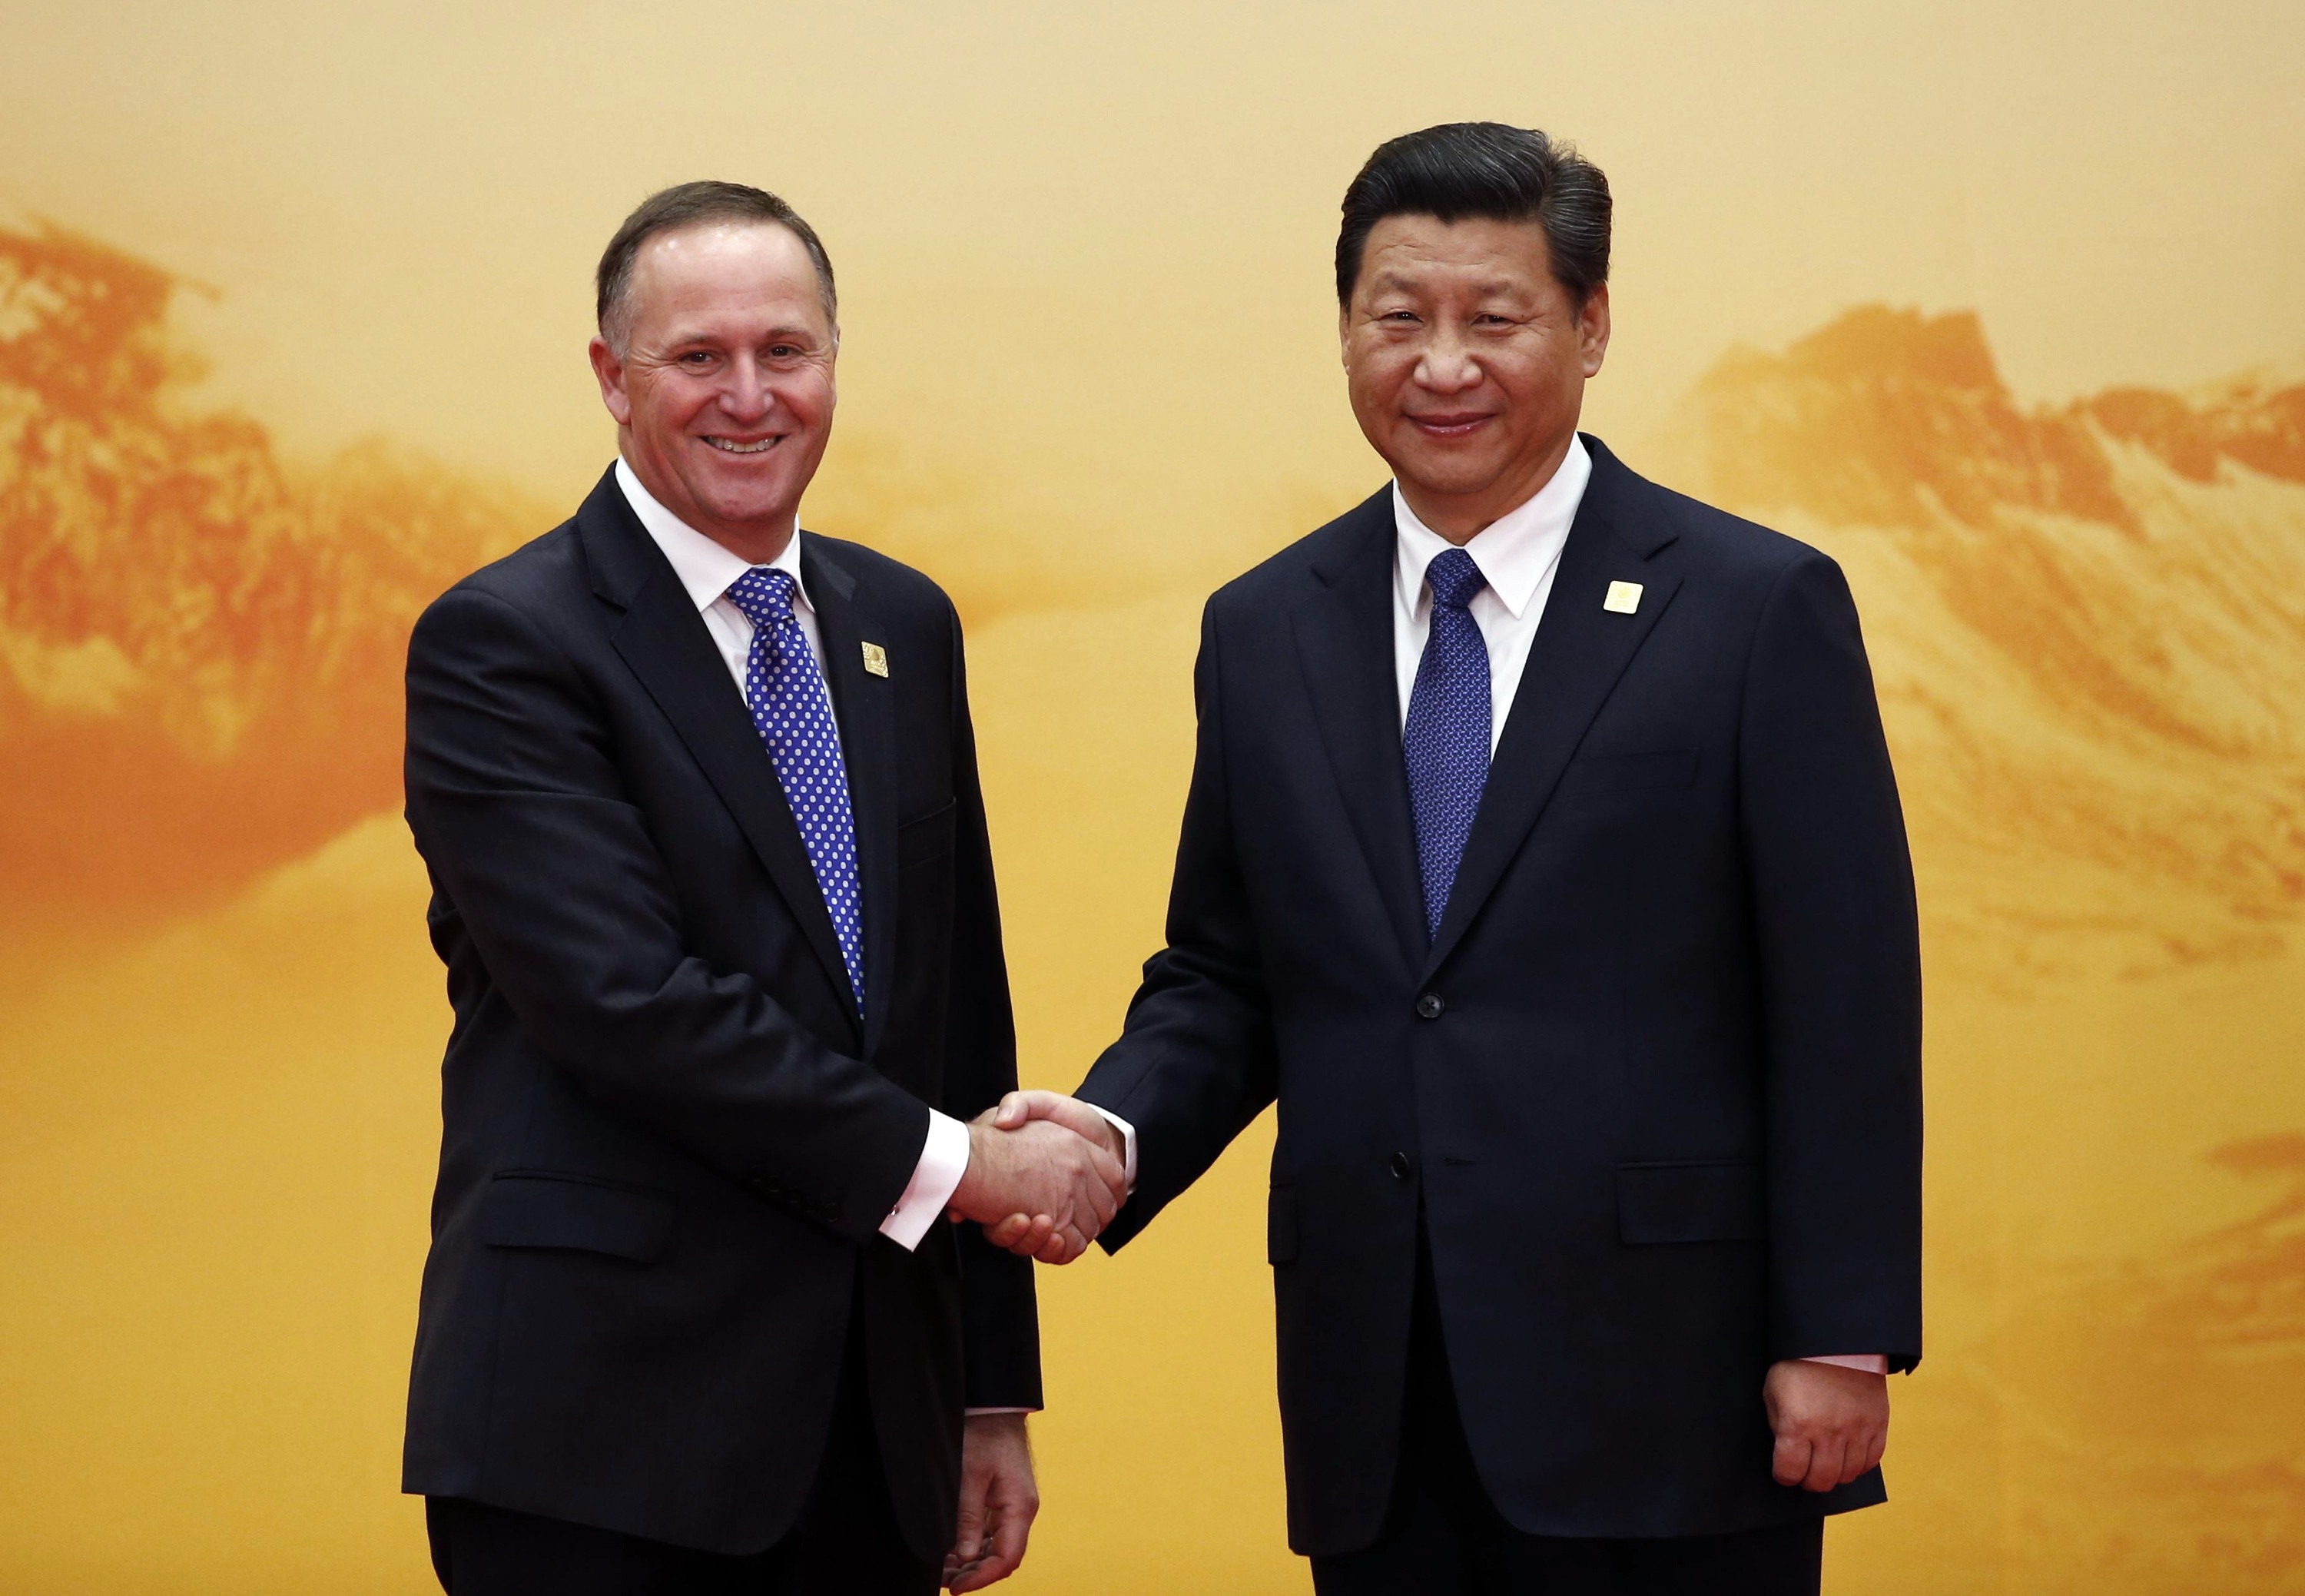 New Zealand's Prime Minister John Key (L) shakes hands with China's President Xi Jinping during a welcoming ceremony of the Asia Pacific Economic Cooperation (APEC) forum, inside the International Convention Center at Yanqi Lake, in Beijing, November 11, 2014. REUTERS/Kim Kyung-Hoon (CHINA - Tags: POLITICS BUSINESS)